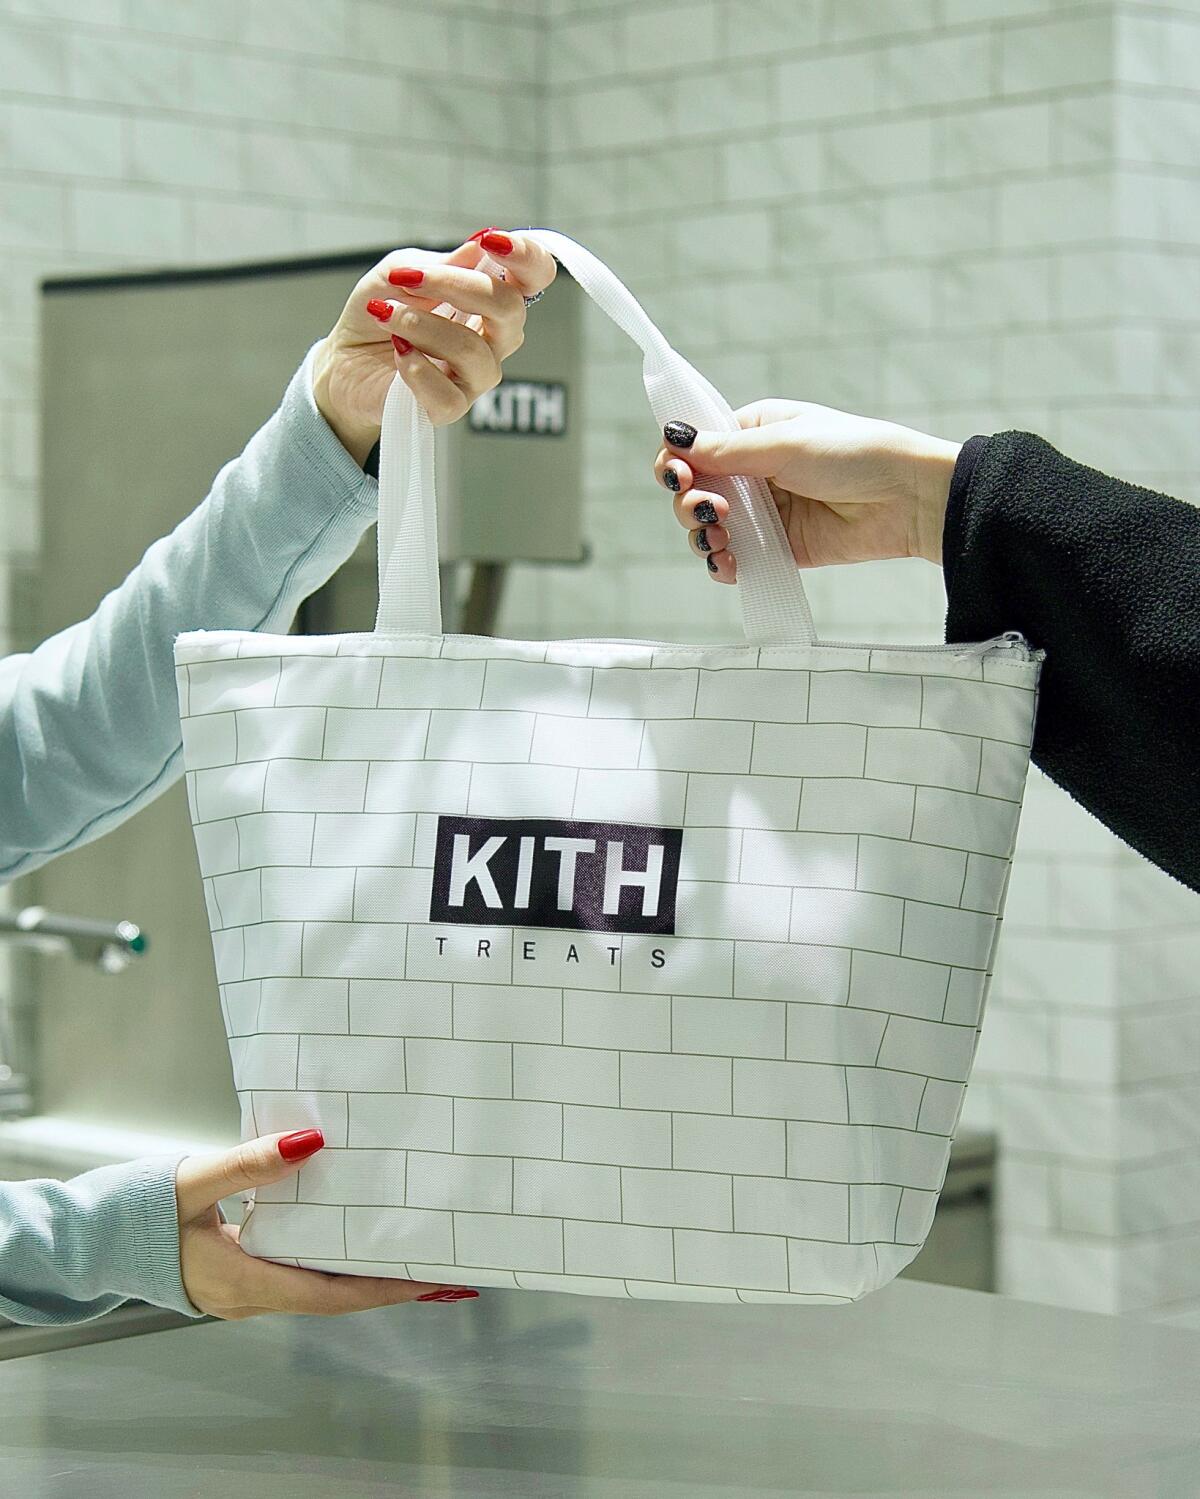 Kith Design Studios Packable Tote エコバッグ